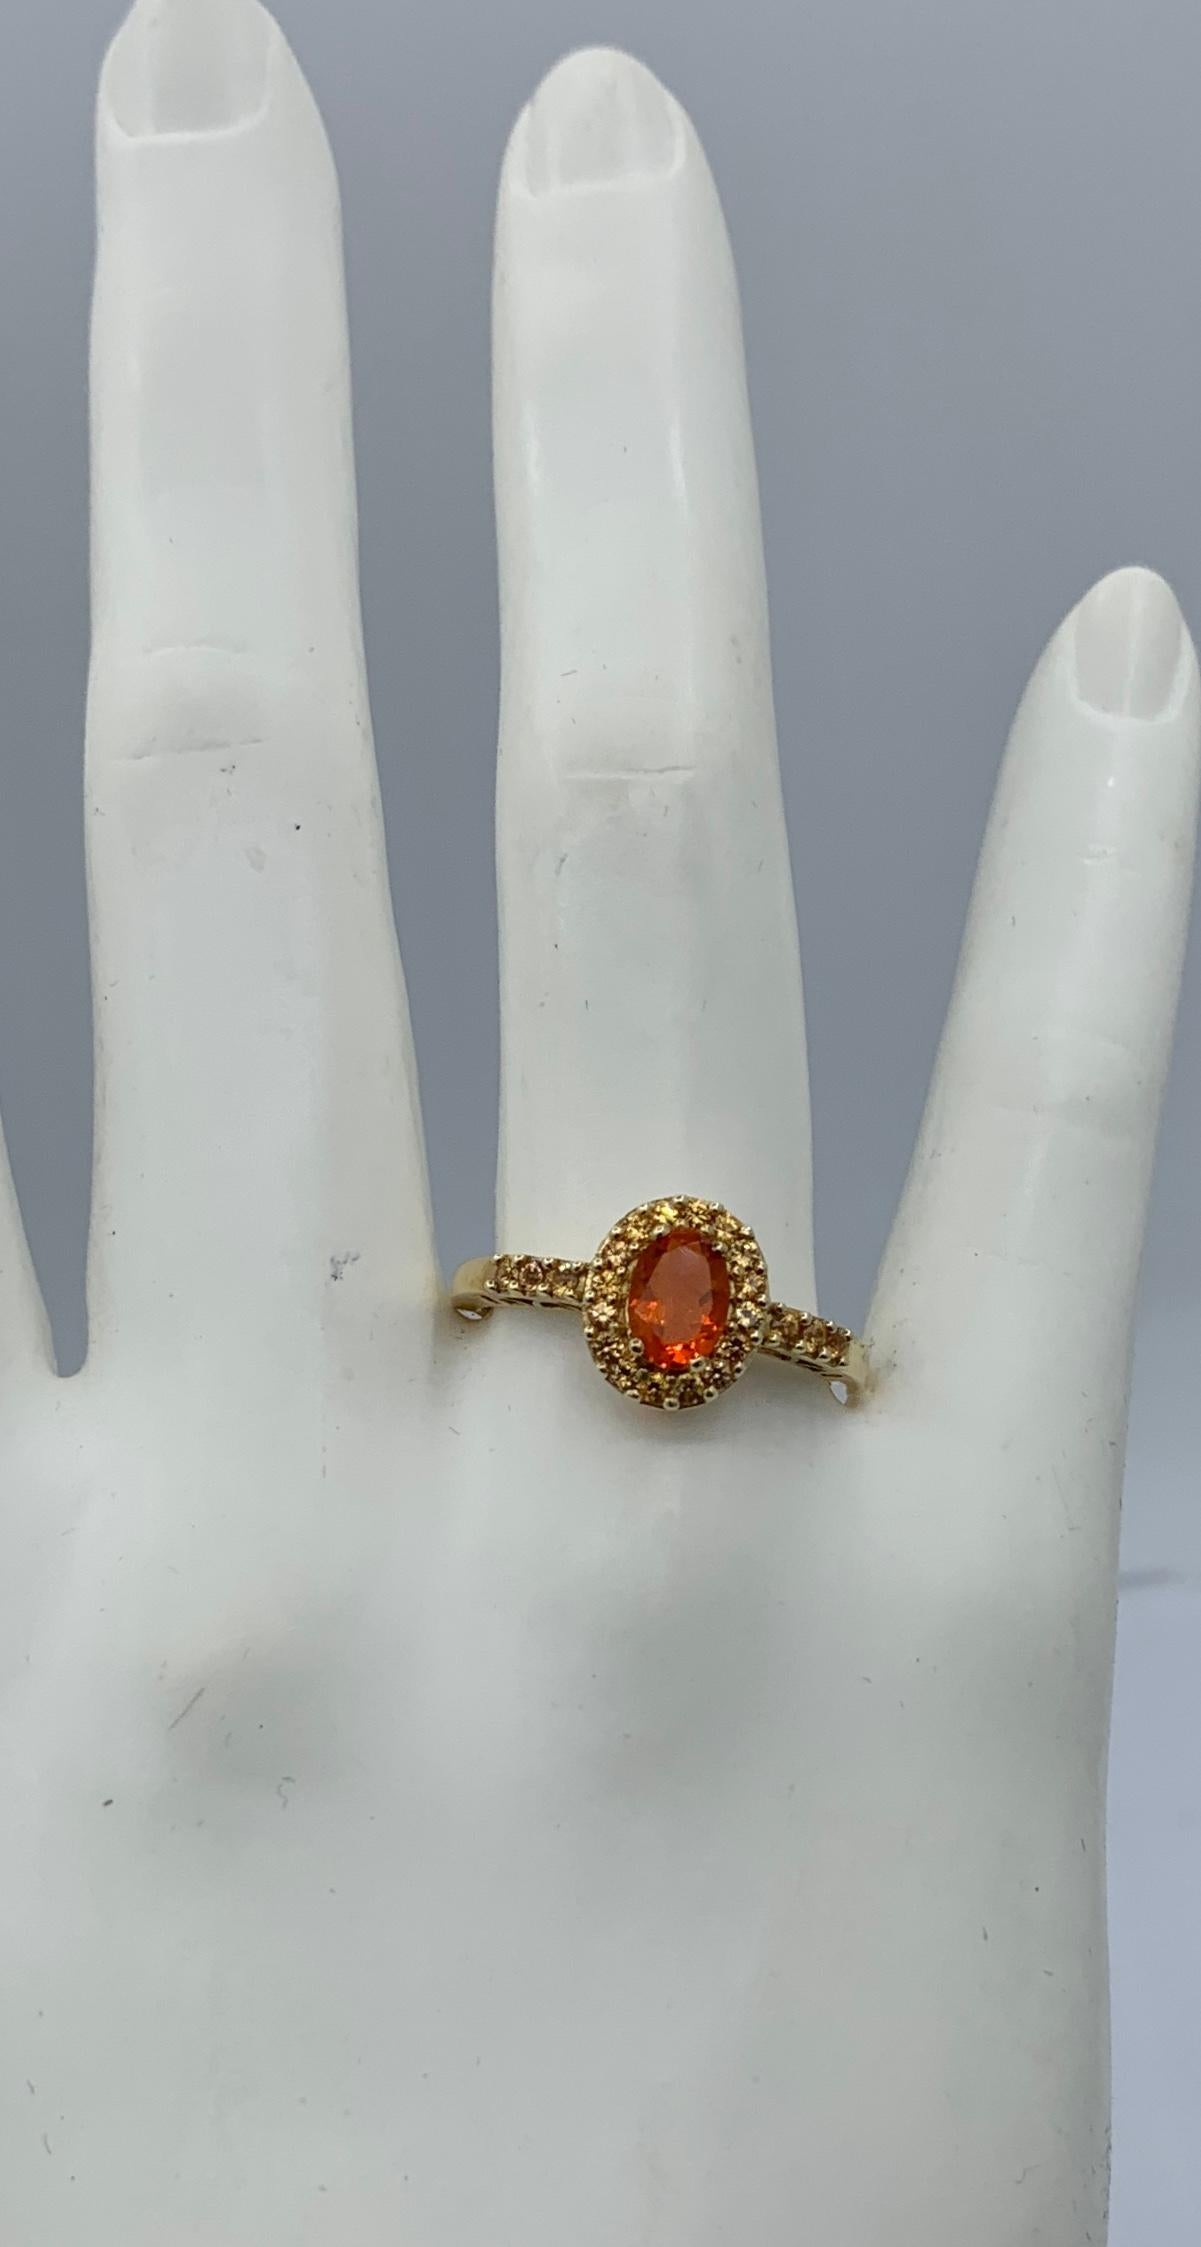 This is a gorgeous estate Mexican Fire Opal Ring with a halo of beautiful Citrine gems which also extend down the band.  The ring is 14 Karat Yellow Gold.  The sparkling oval Mexican Opal has the sparkling orange fire that we love in the Mexican